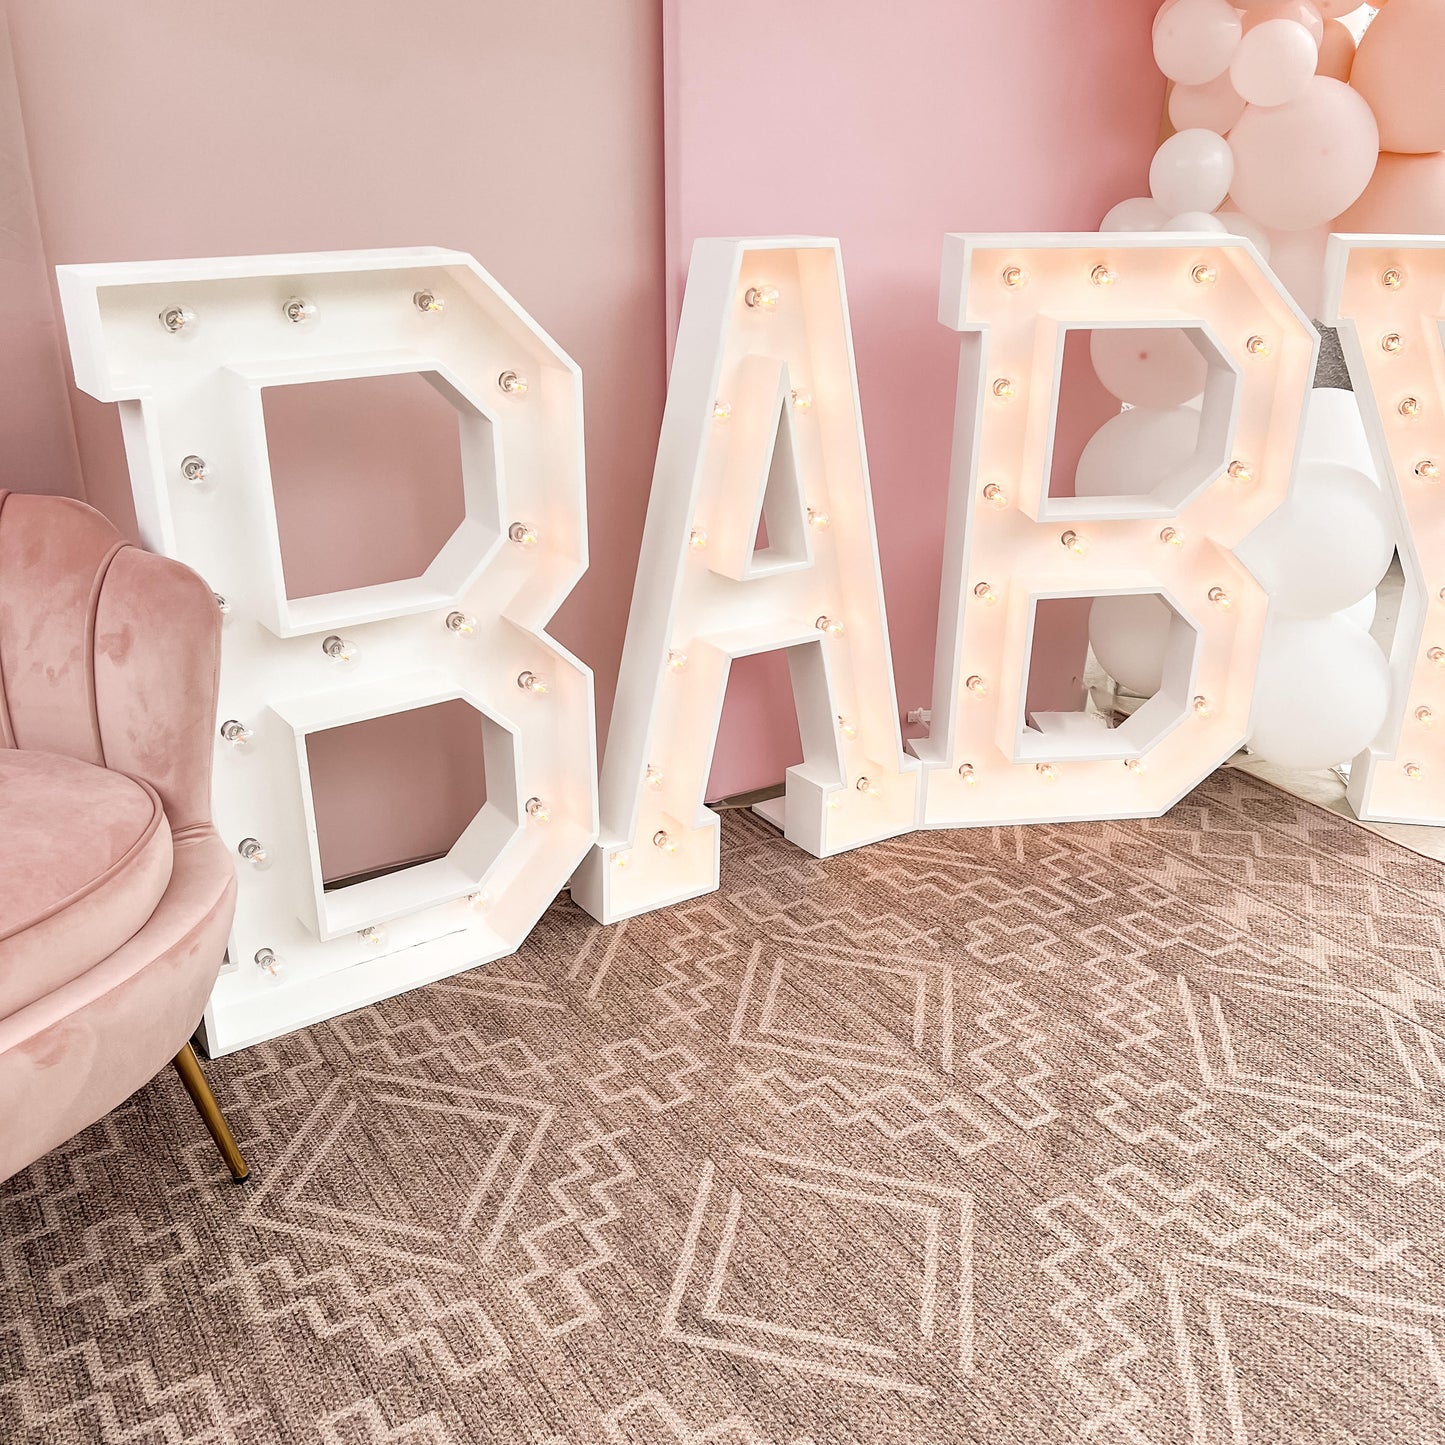 BABY Marquee Sign Rental SIGN ONLY